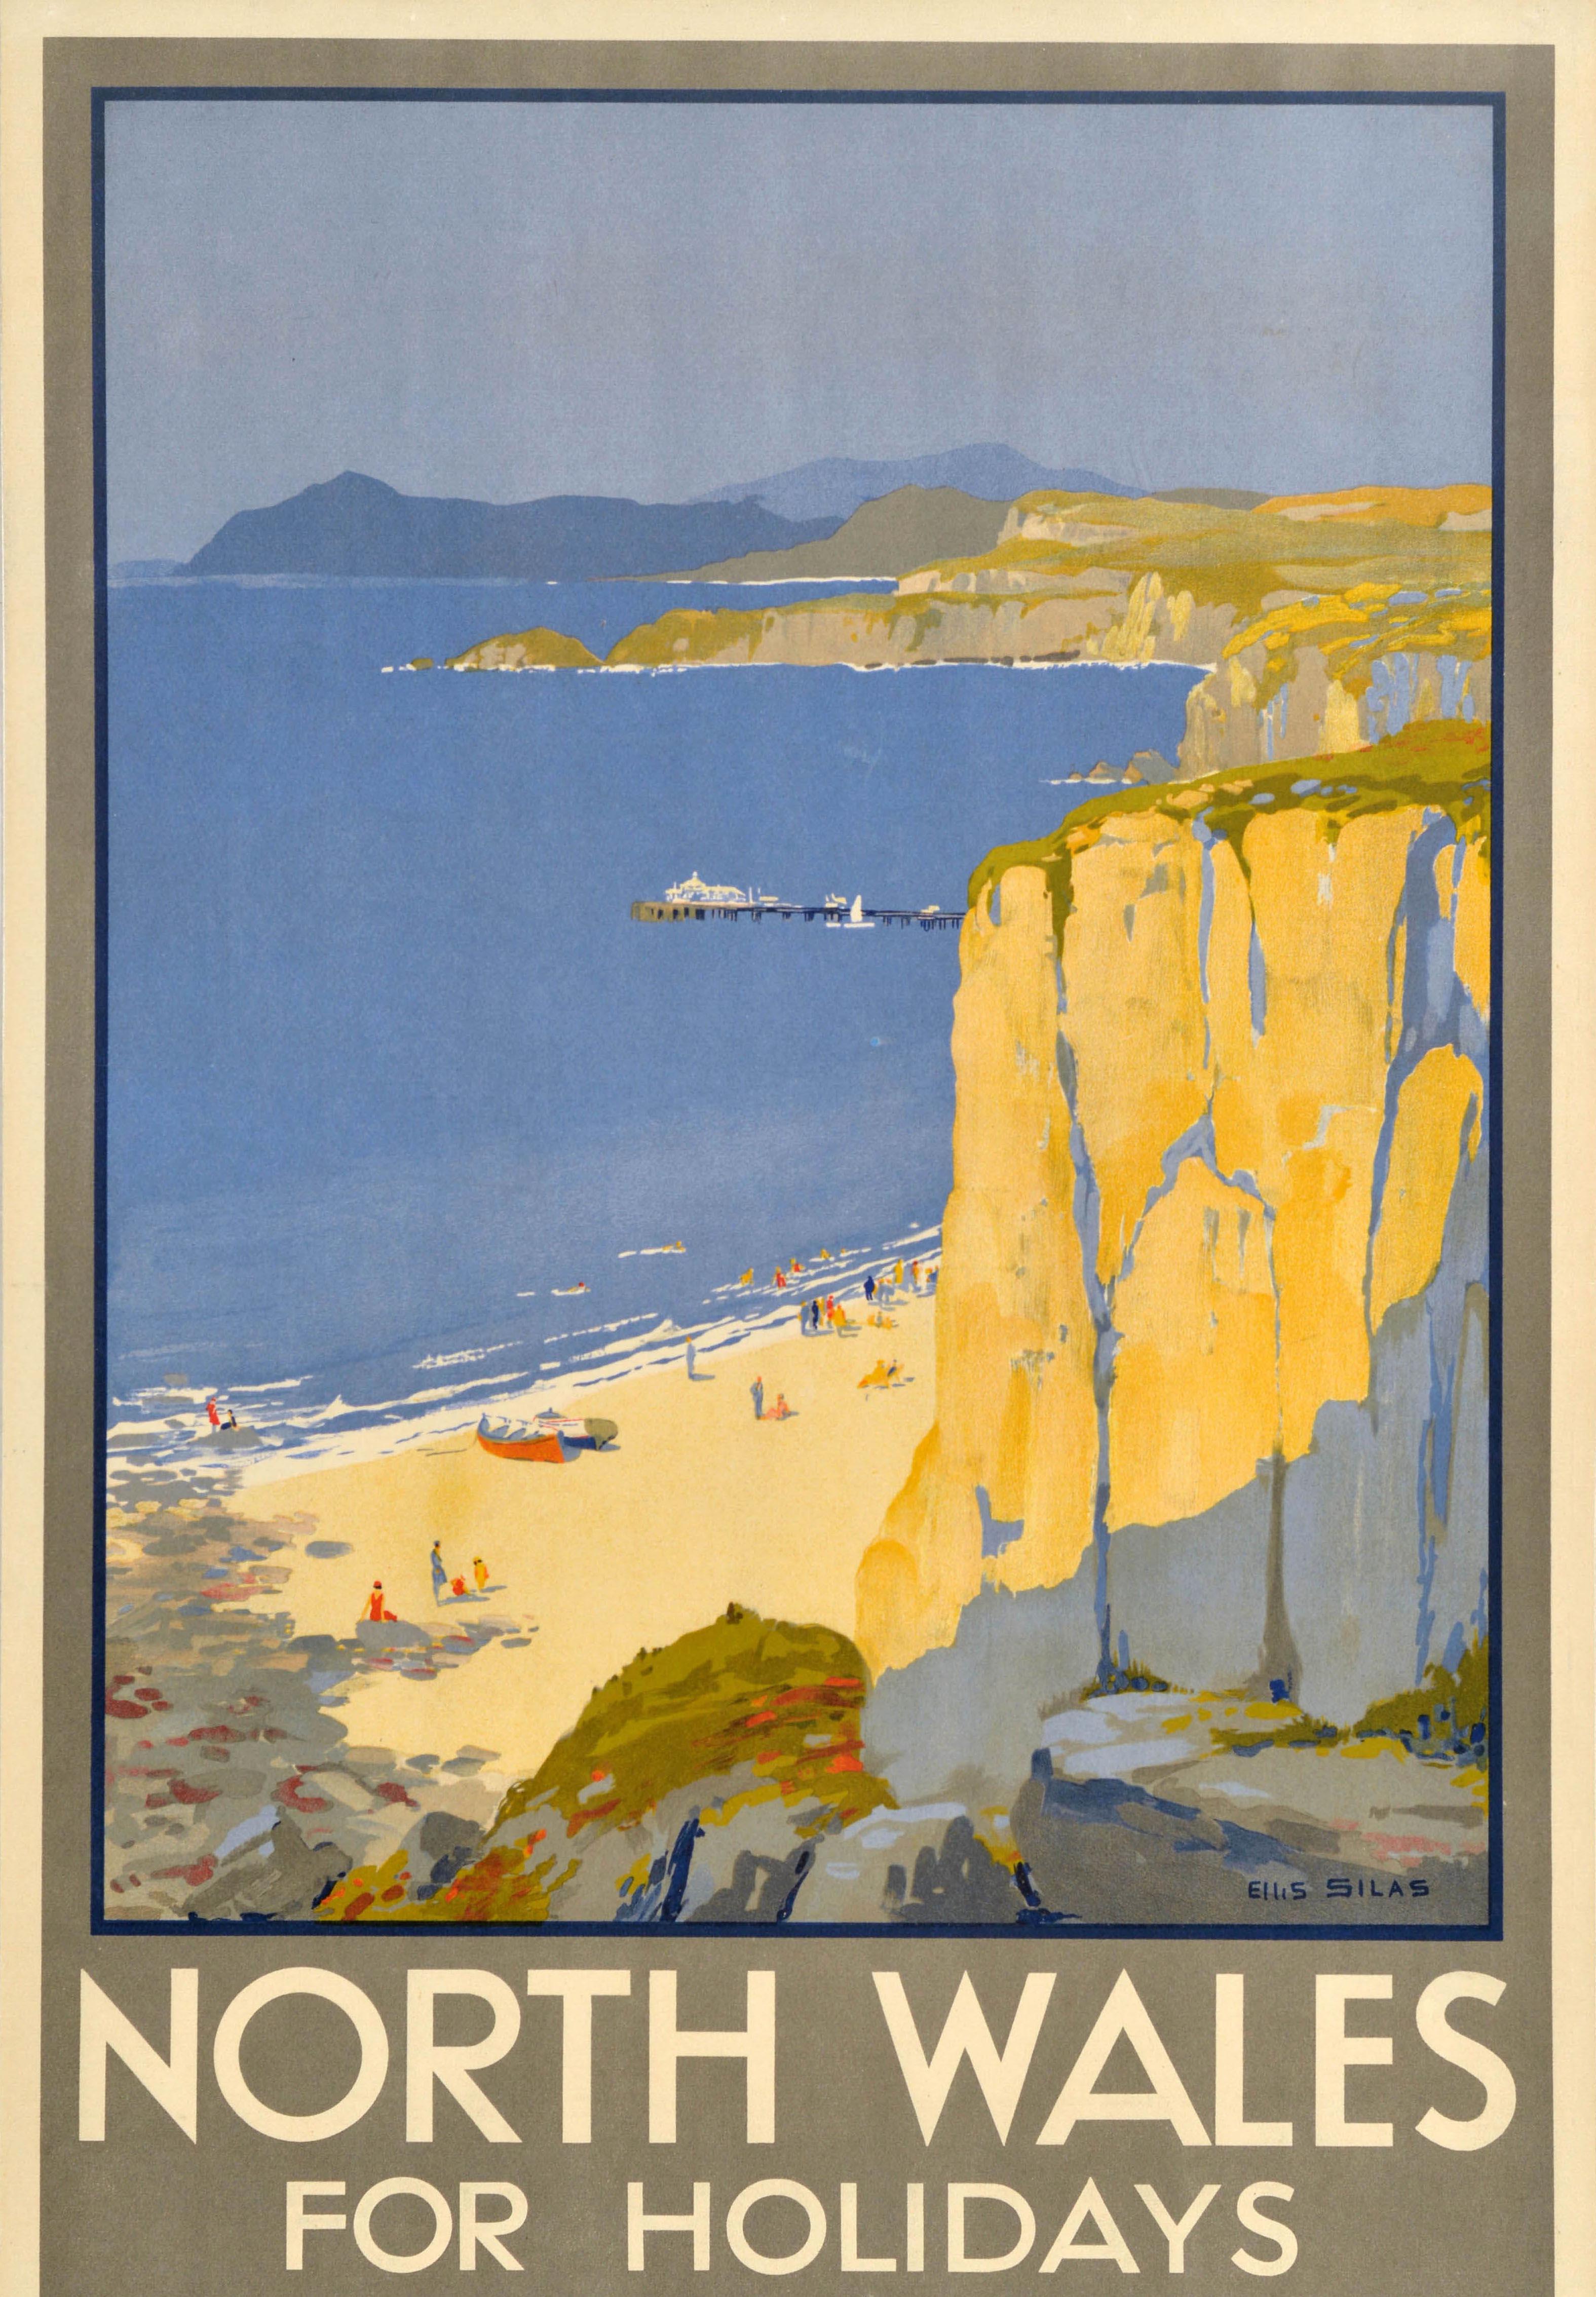 British Original Vintage Train Travel Poster North Wales For Holidays LMS Railway Coast For Sale